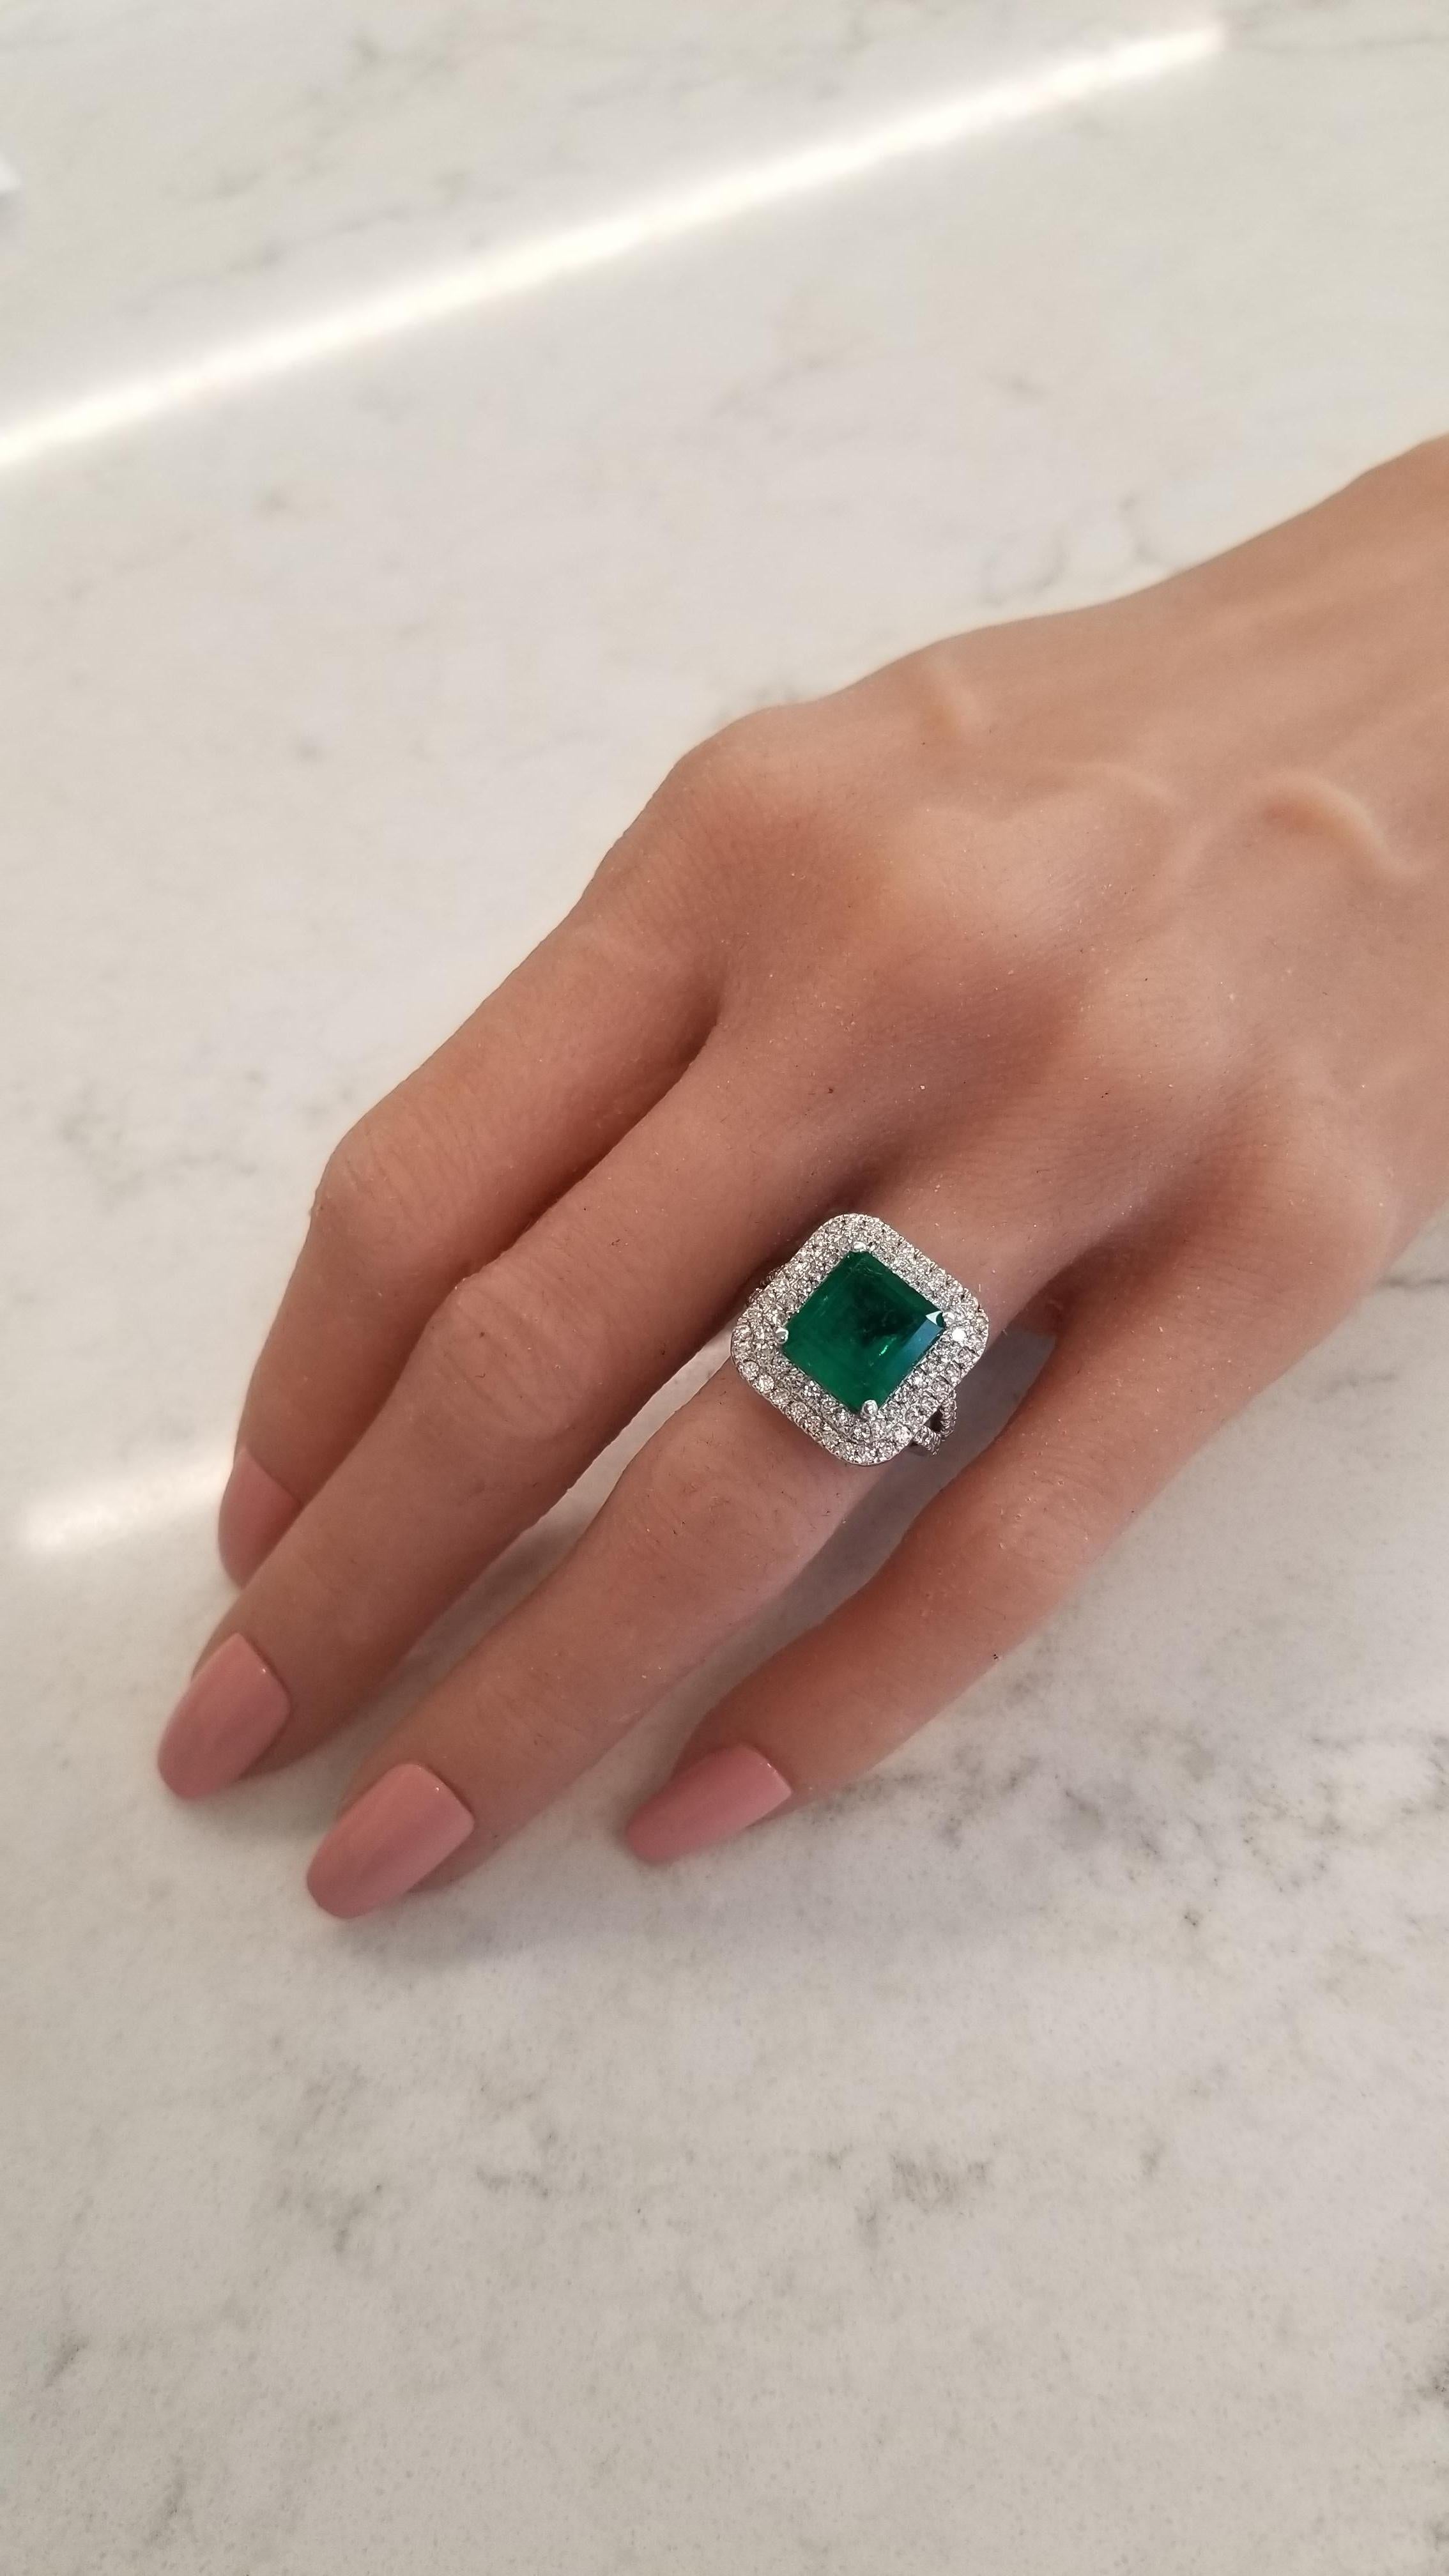 This is a fine green Columbian emerald cut weighing 5.30 carat. It is a square emerald cut that is prong set and measures 10.12x9.58mm. Its color is bright, vibrant green. Its color is evenly distributed throughout the gem. Sparkling round brilliant